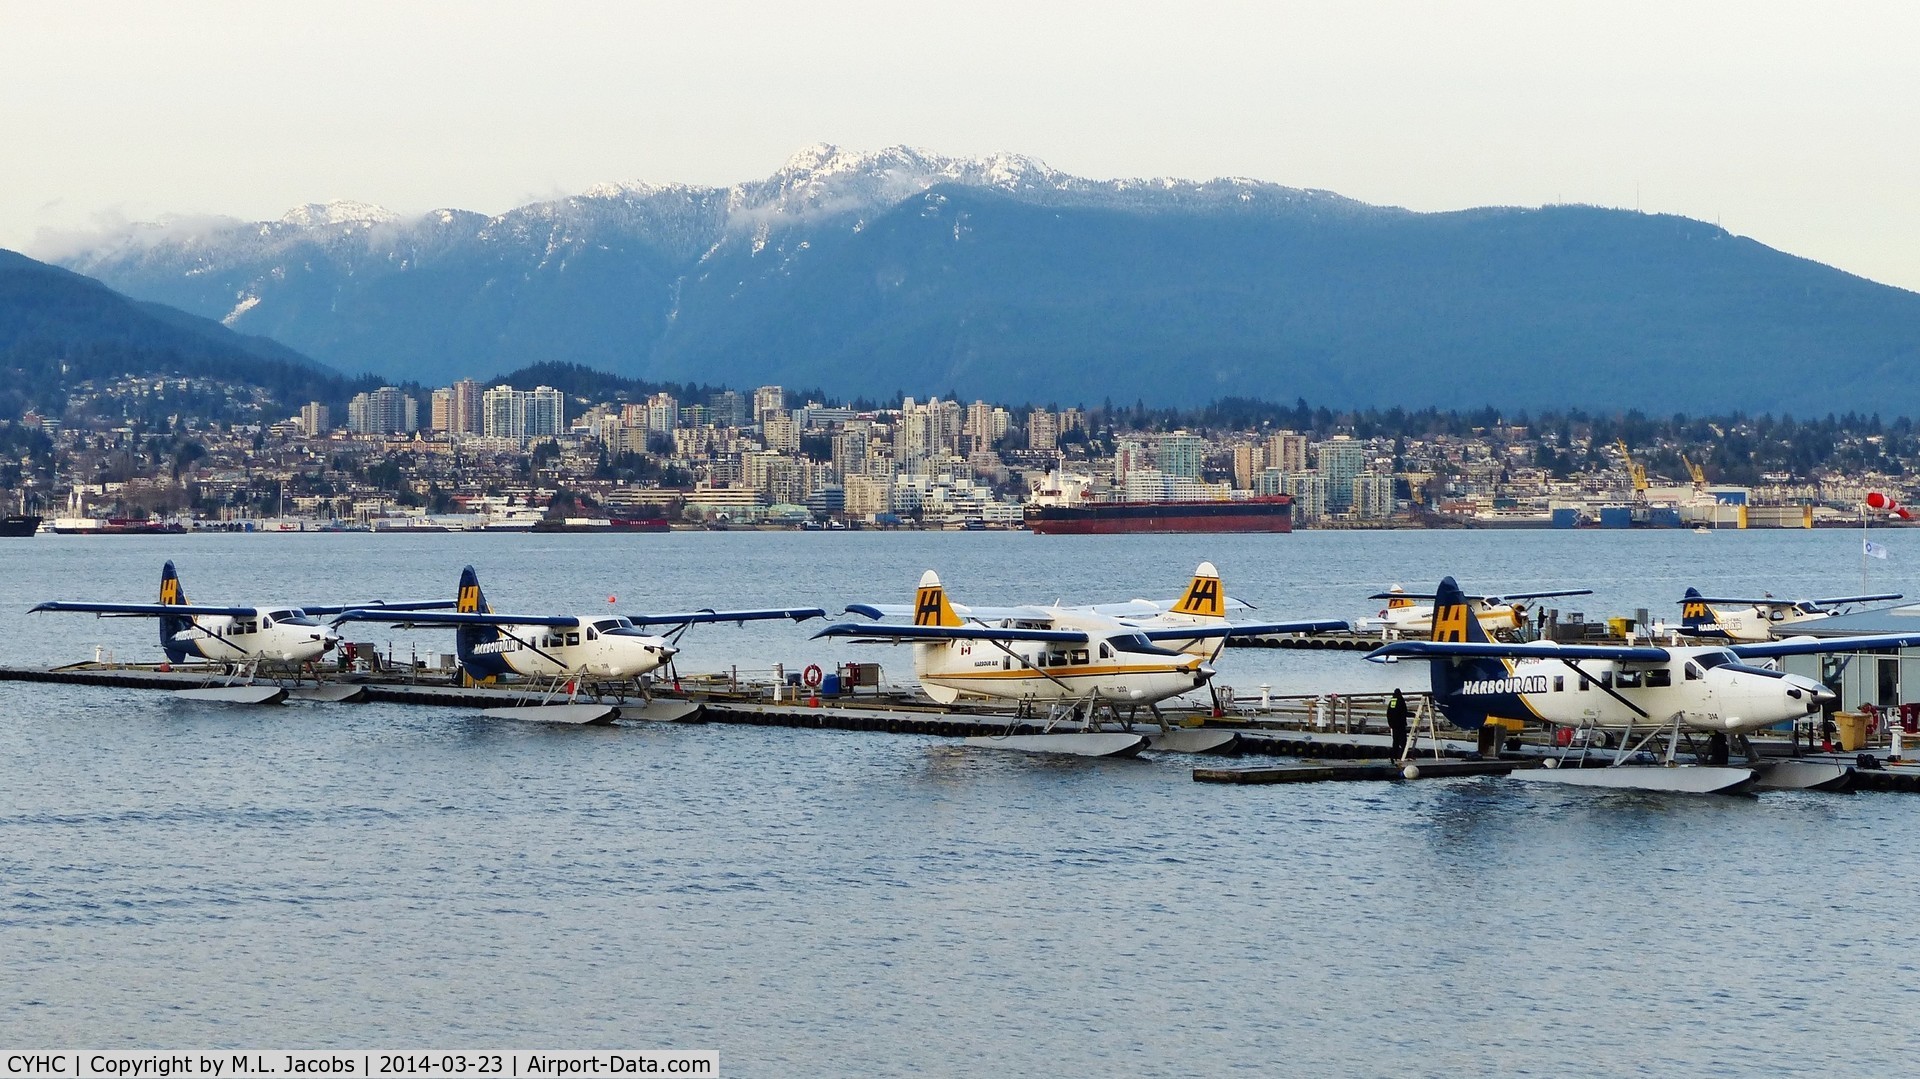 Vancouver Harbour Water Airport (Vancouver Coal Harbour Seaplane Base), Vancouver, British Columbia Canada (CYHC) - Harbour Air terminal in Coal Harbour in the early spring evening.  City of North Vancouver across Vancouver Harbour in the background.